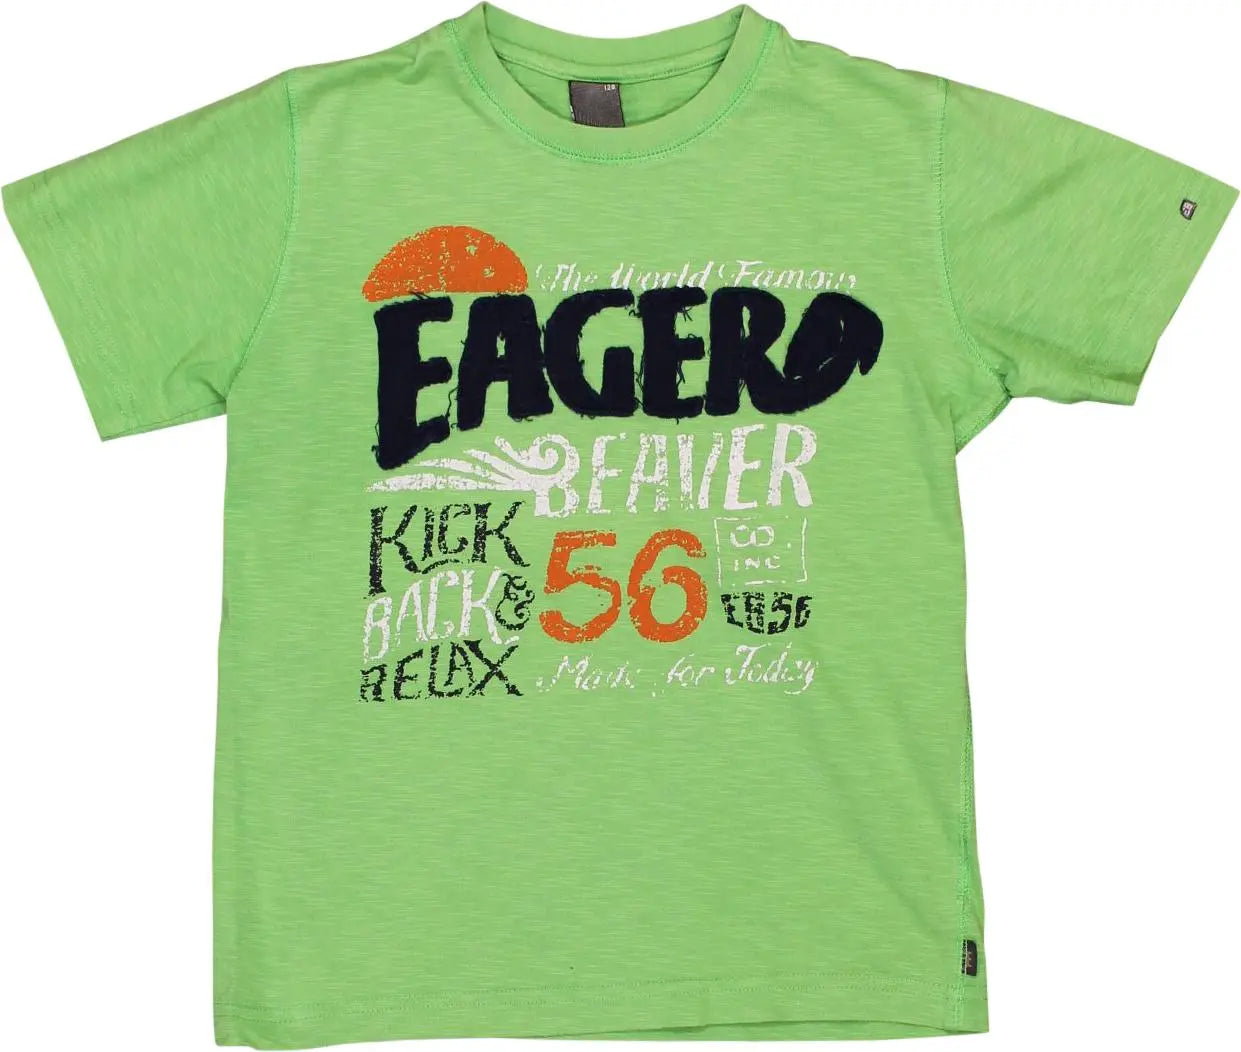 Eager Beaver - YELLOW1907- ThriftTale.com - Vintage and second handclothing